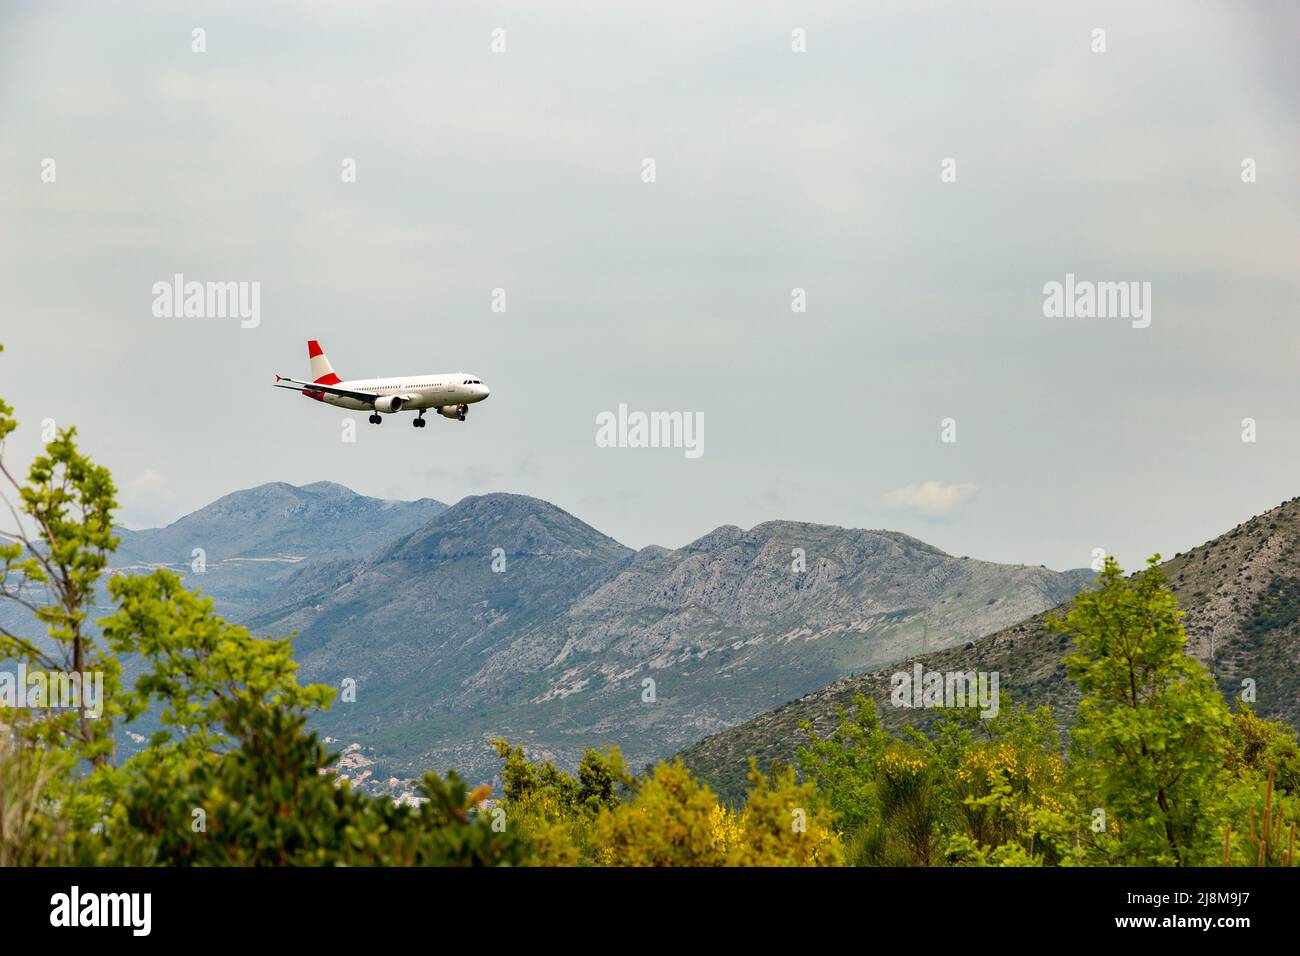 Red-white color airplane landing in Dubrovnik airport (Cavtat). Stock Photo